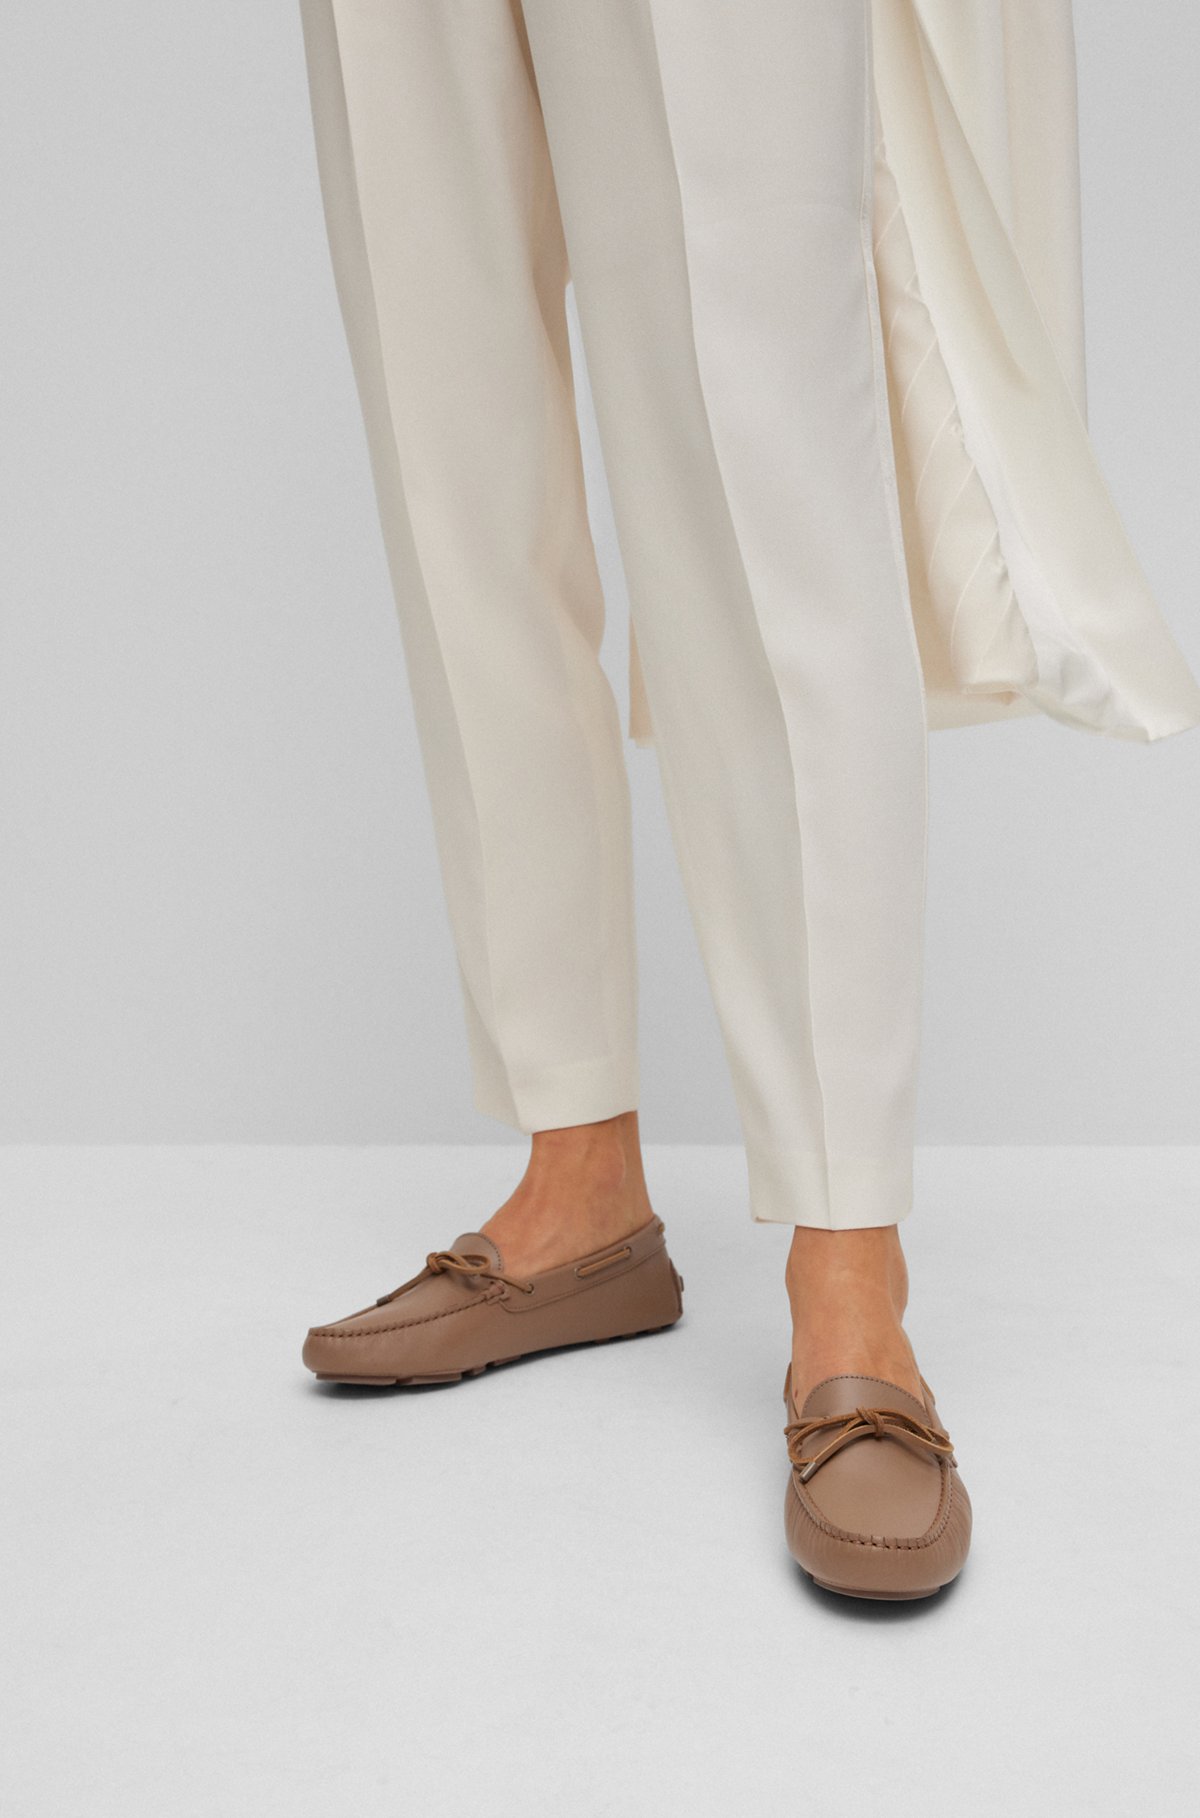 Driver moccasins in leather with bow detail, Beige